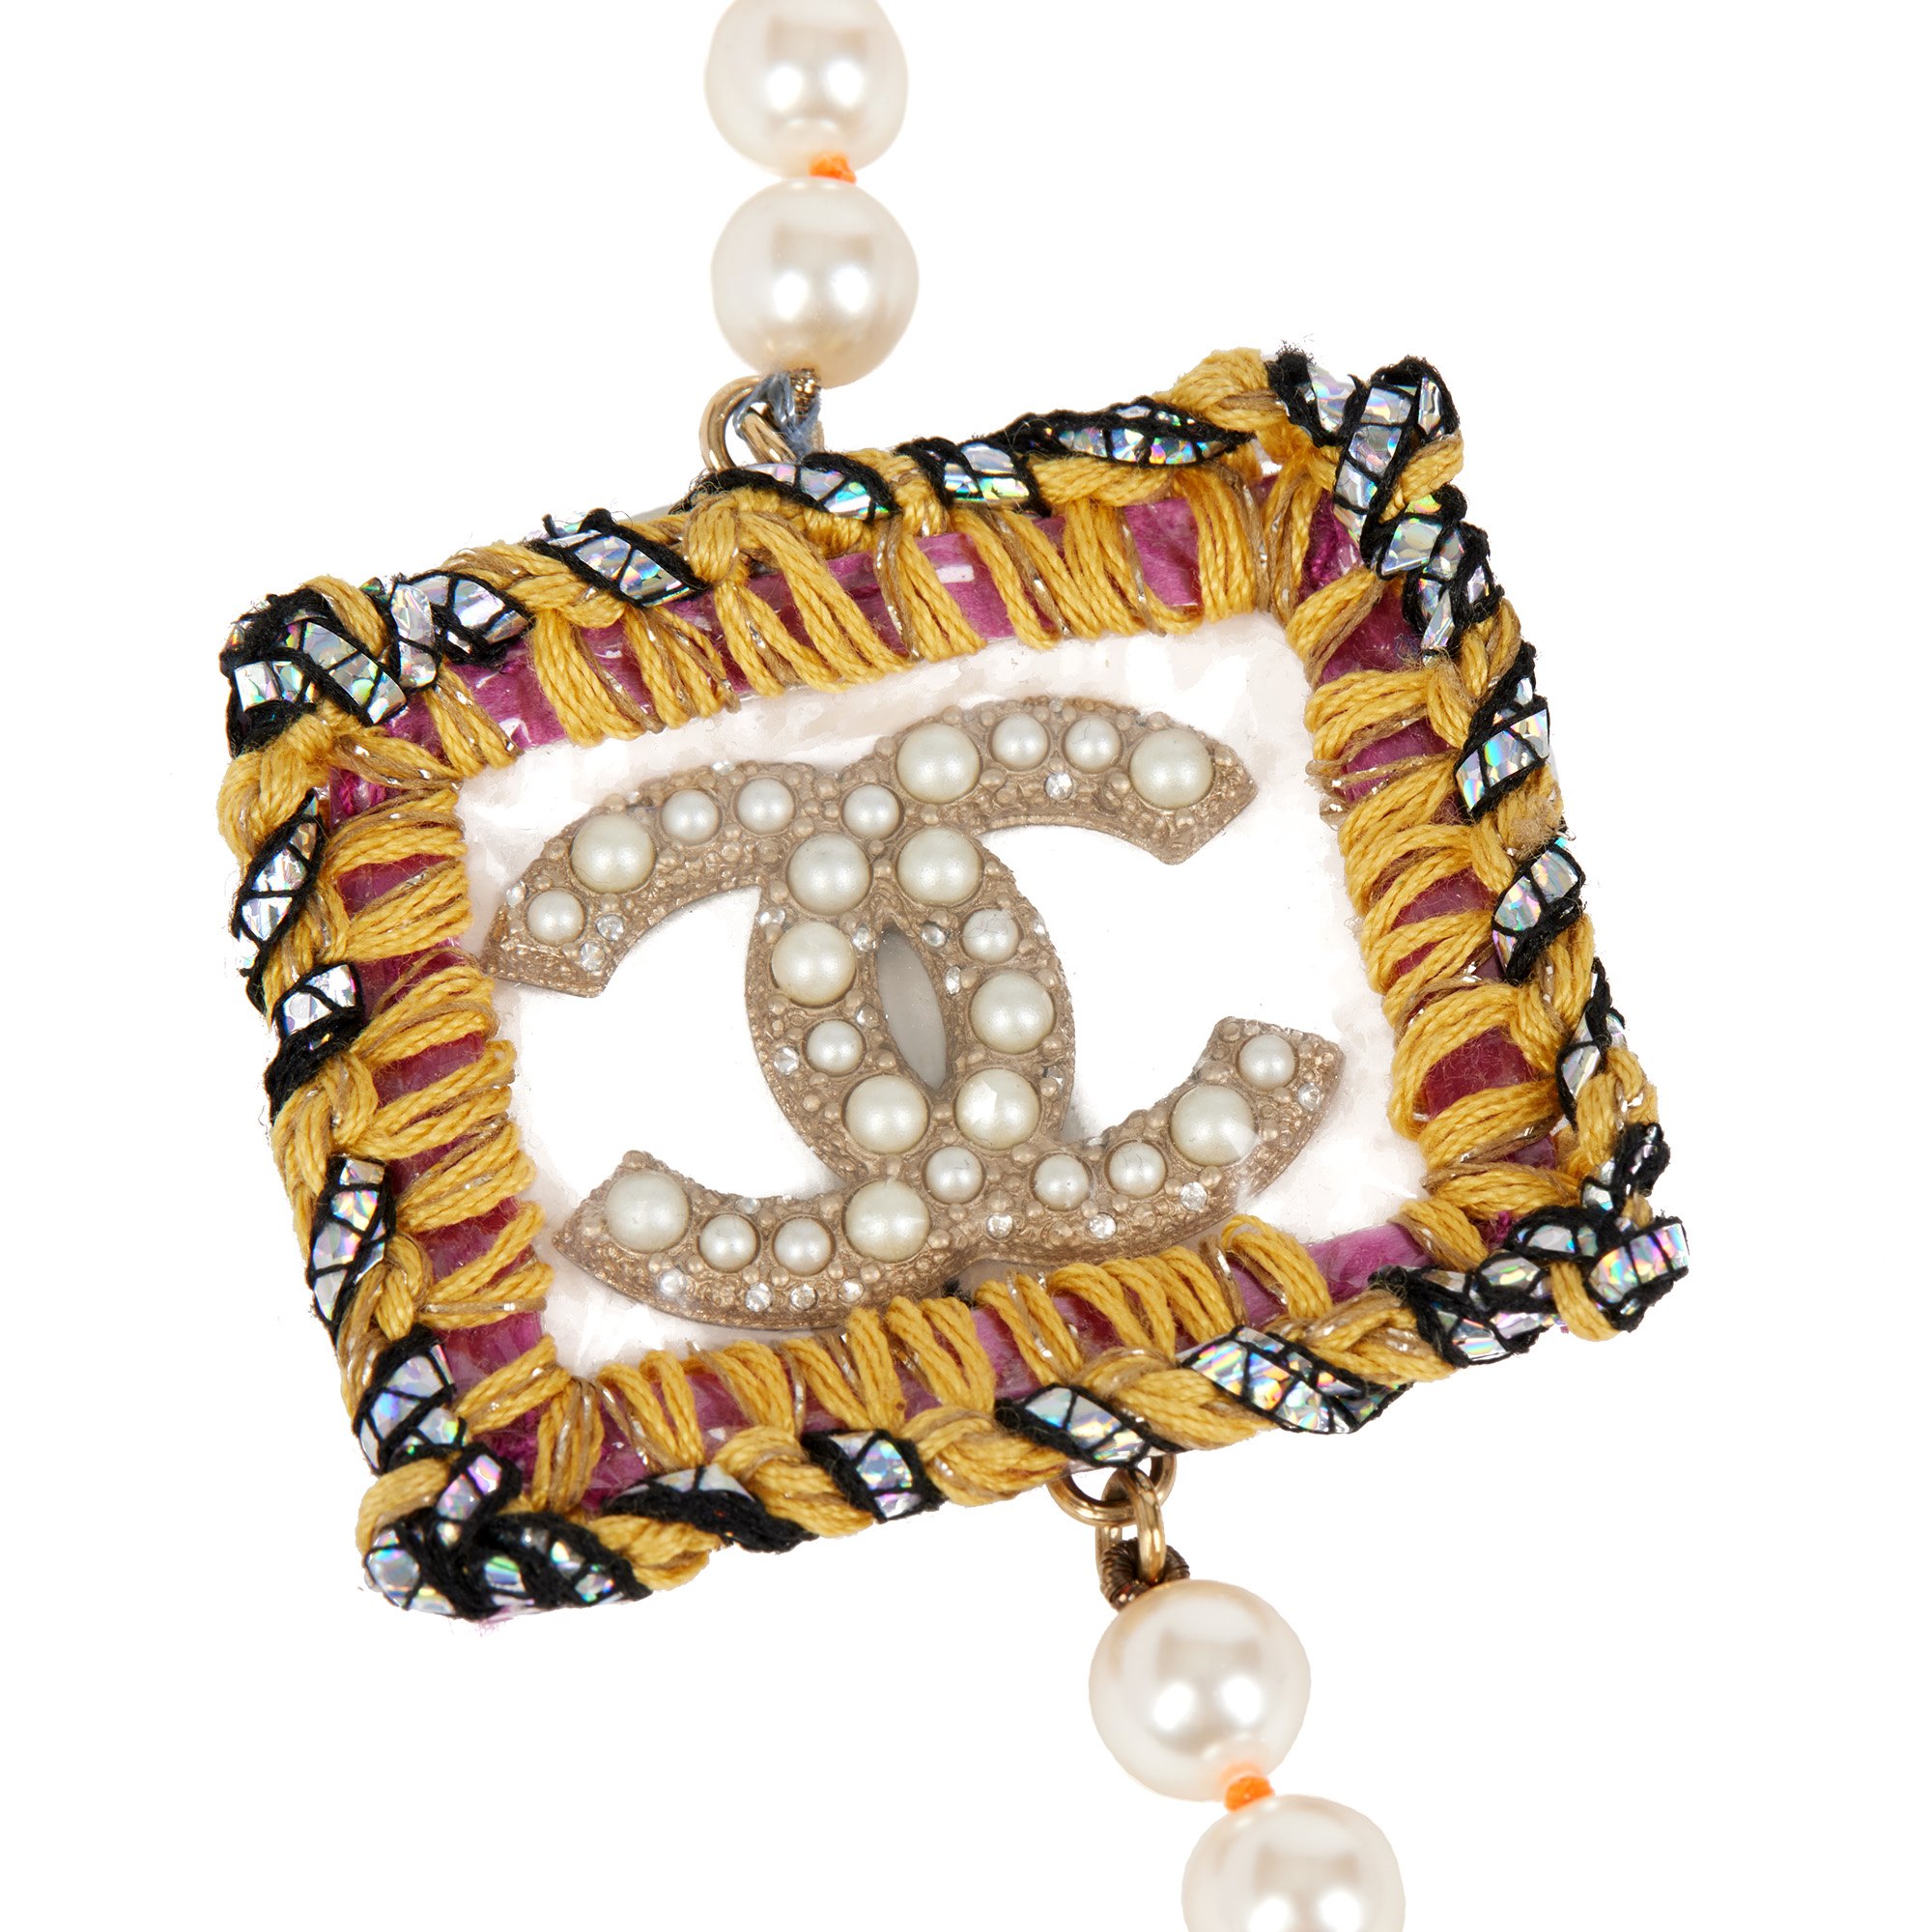 Chanel Supermarket Collection Necklace